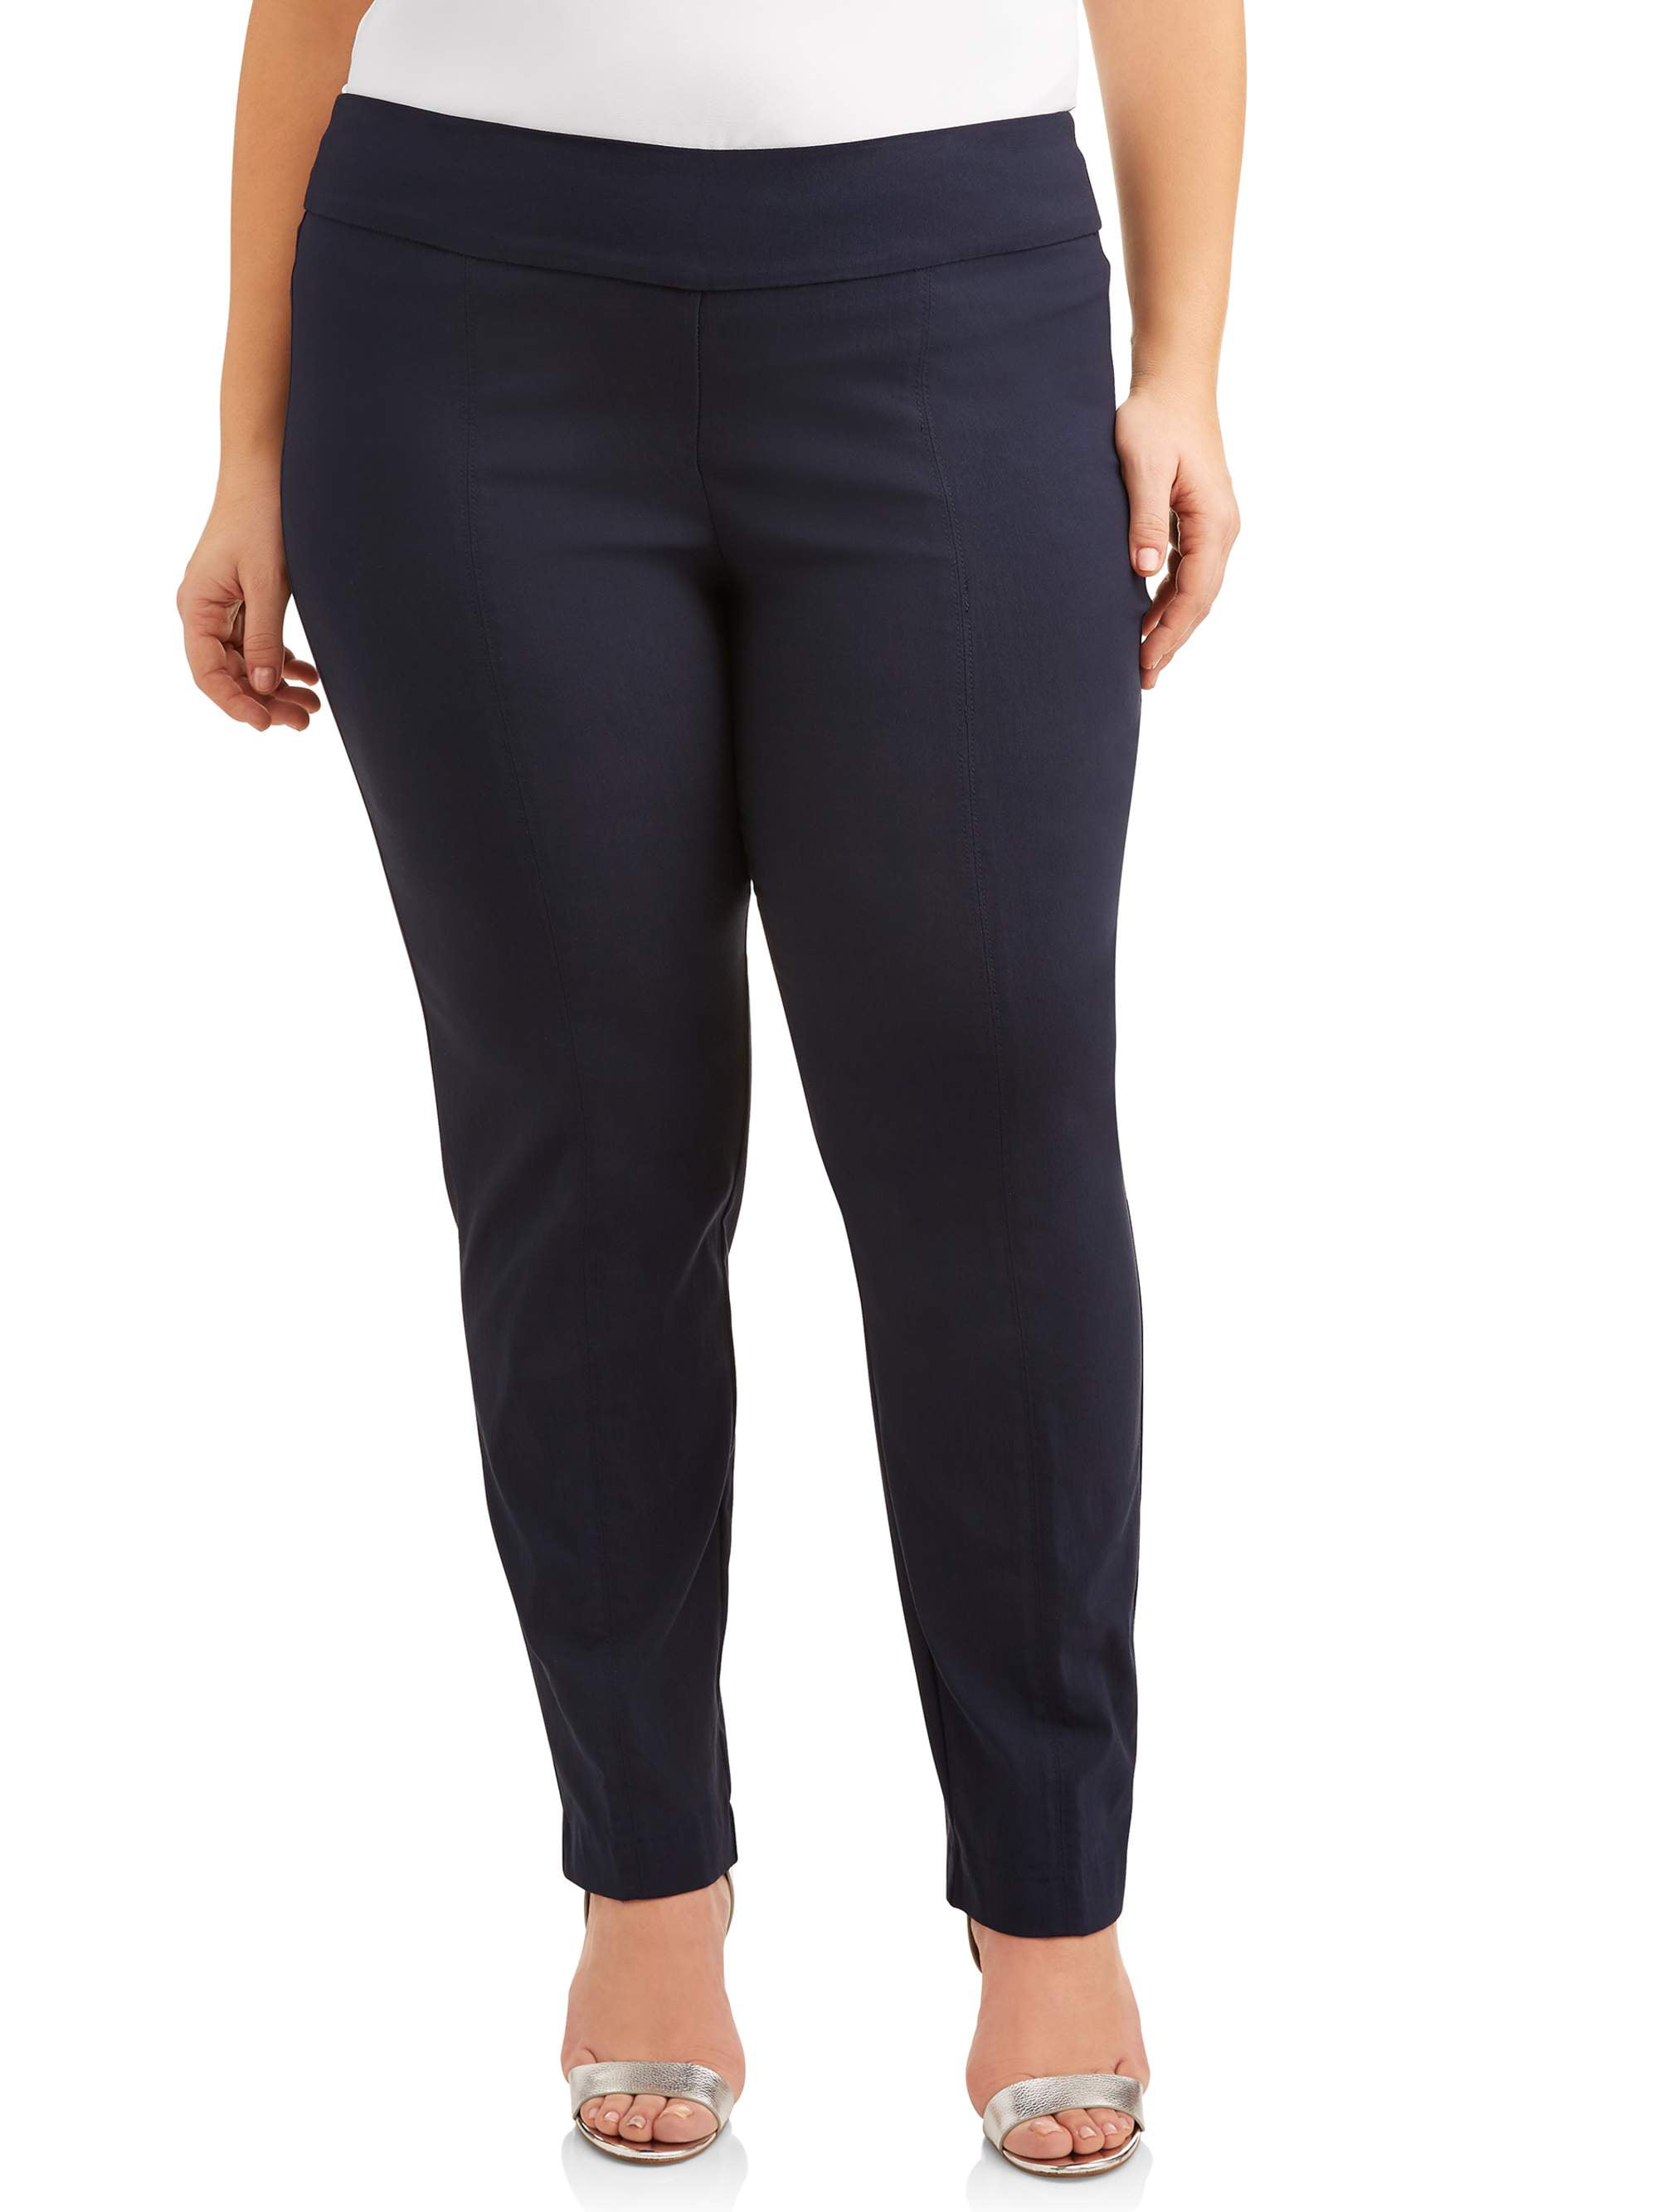 Women's Plus Size Pull On Career Pant with Tummy Control - Walmart.com